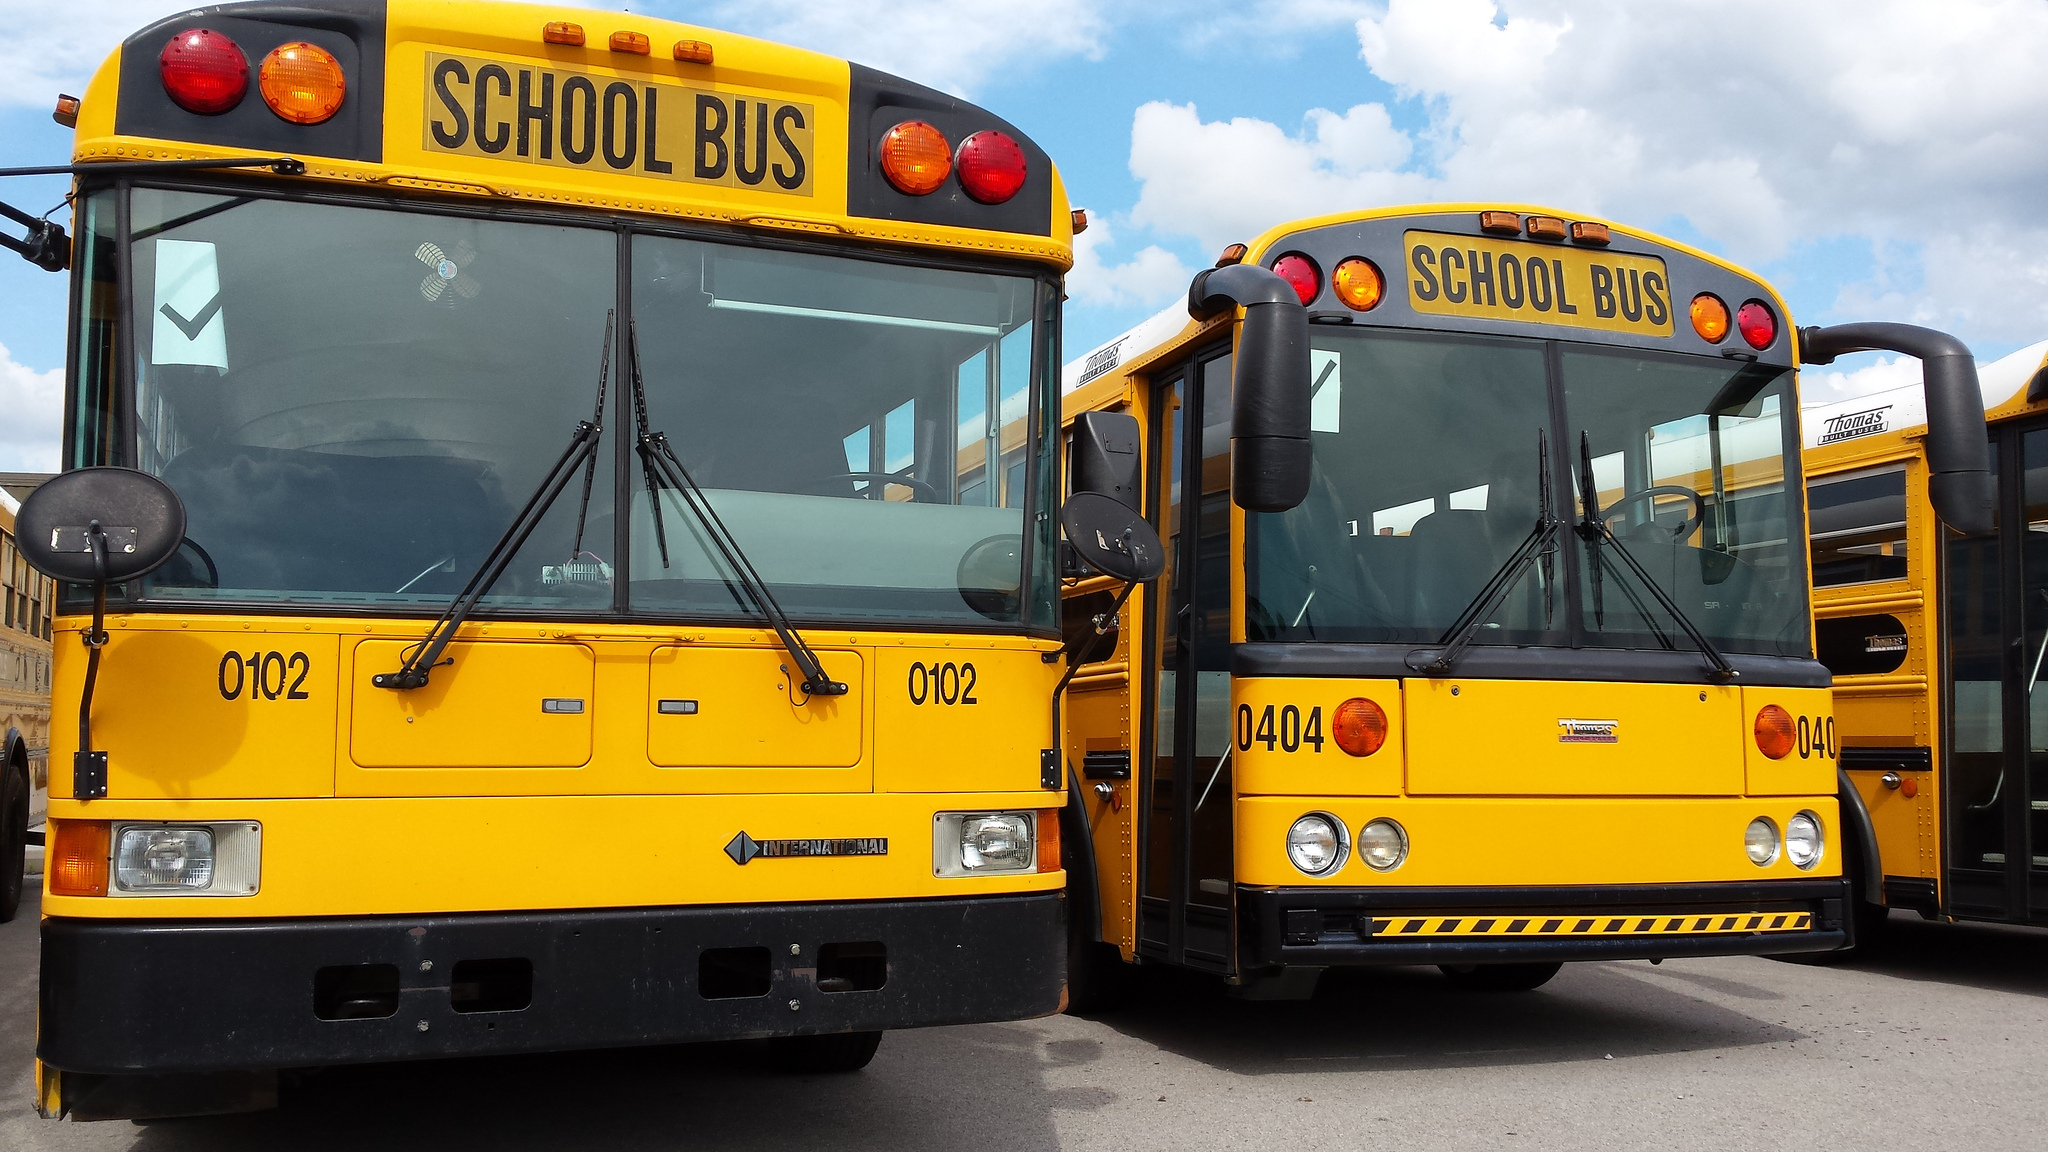 Two school buses sit in a parking lot.